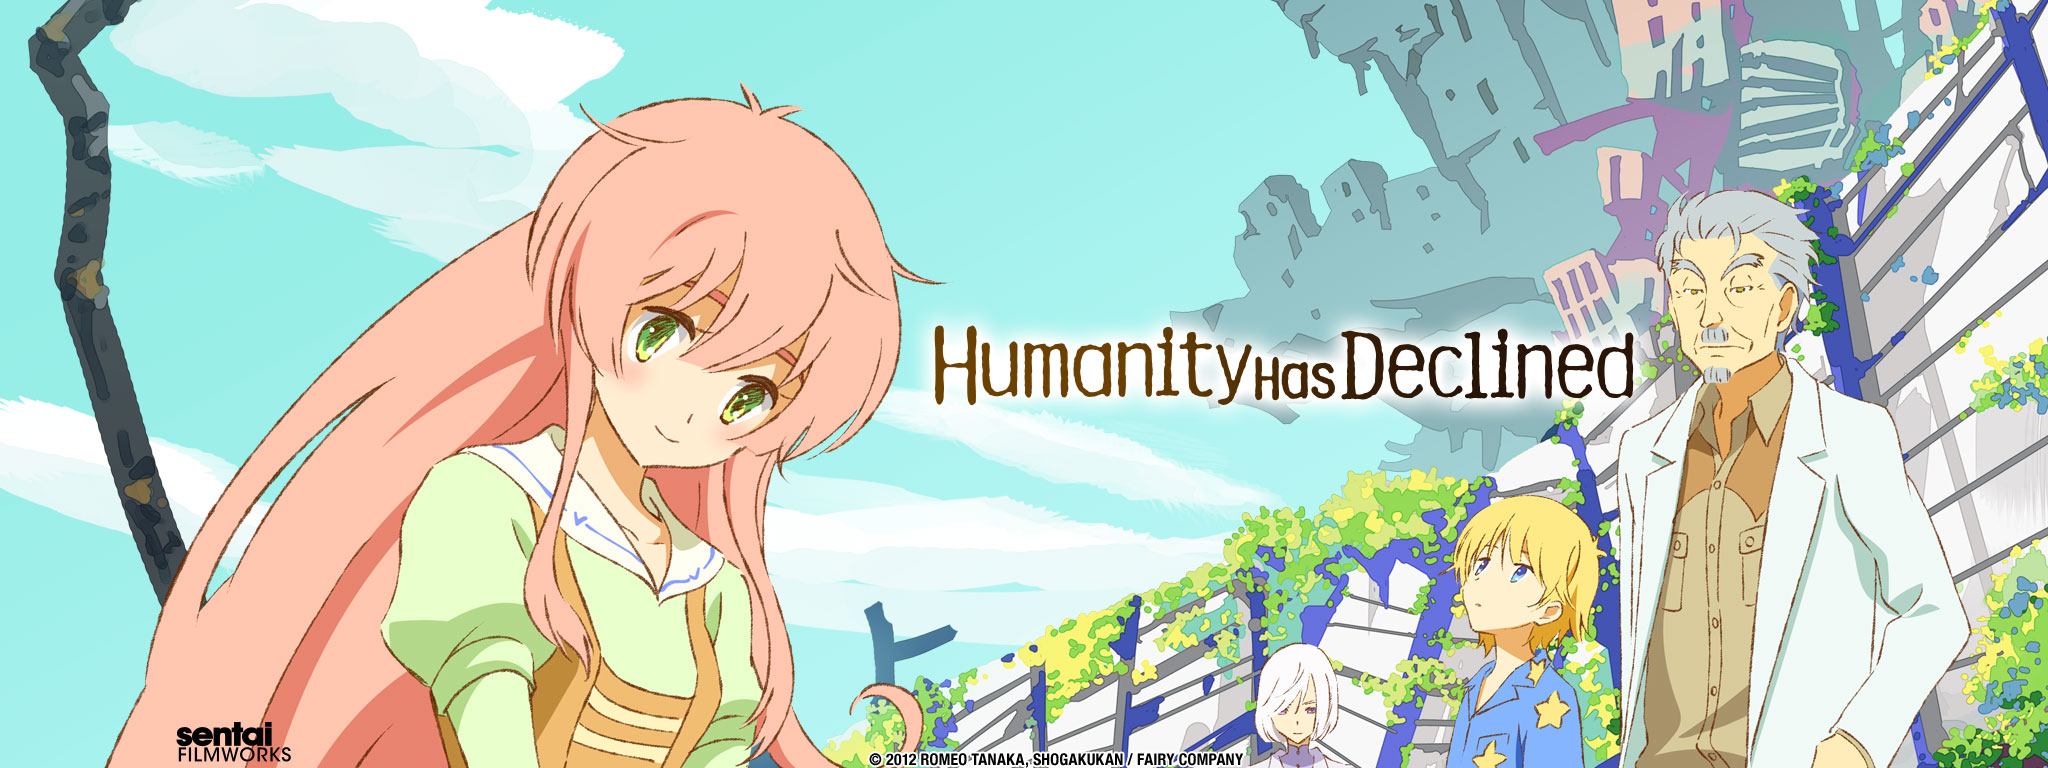 Title Art for Humanity Has Declined